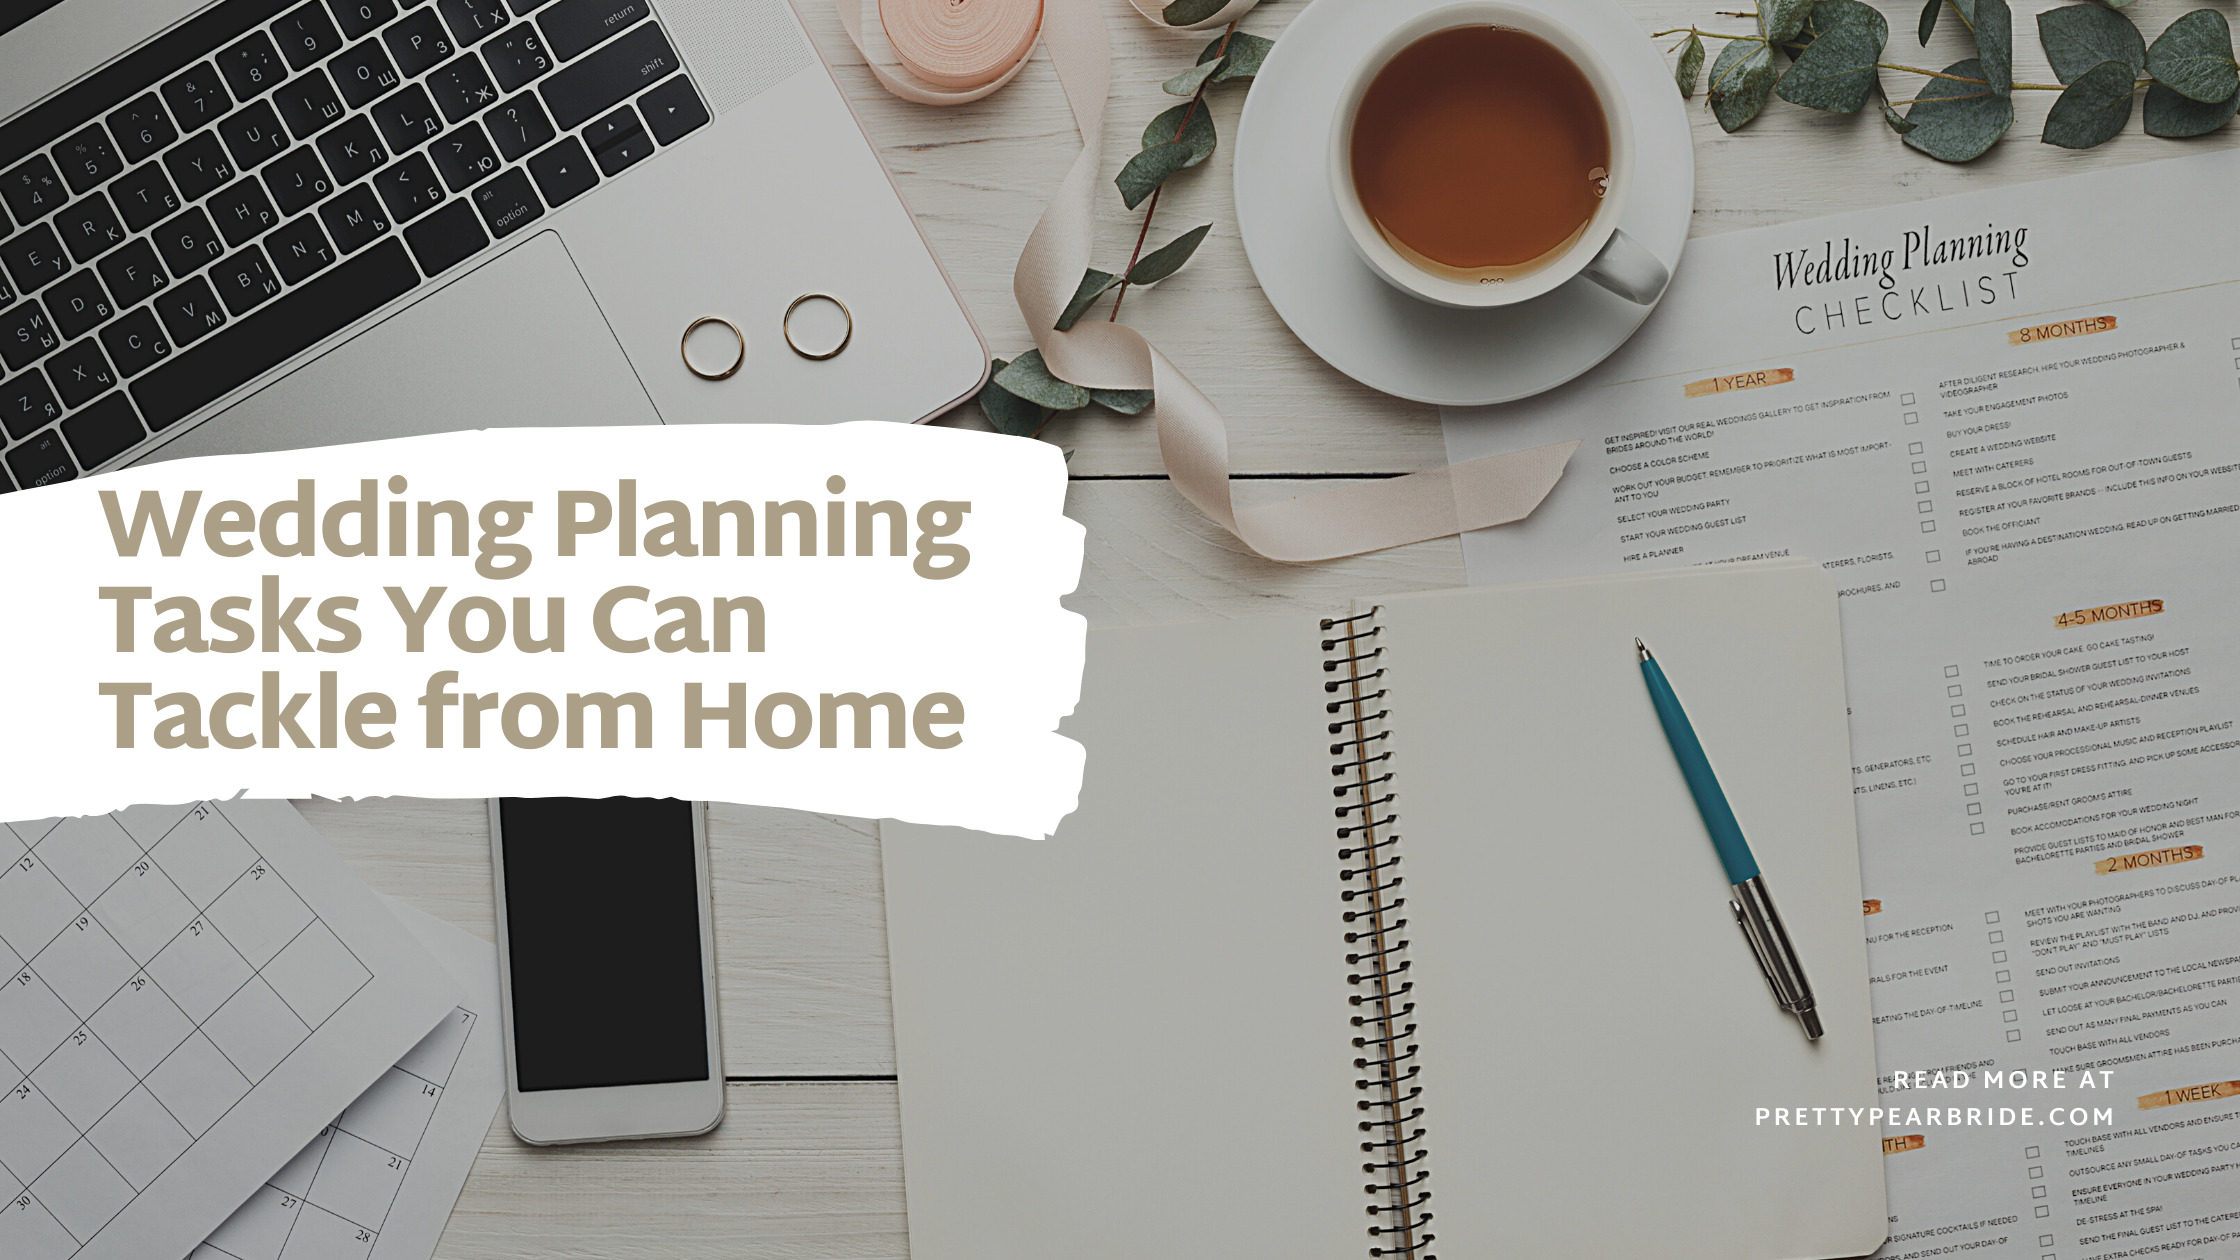 Wedding Planning Tasks You Can Tackle from Home